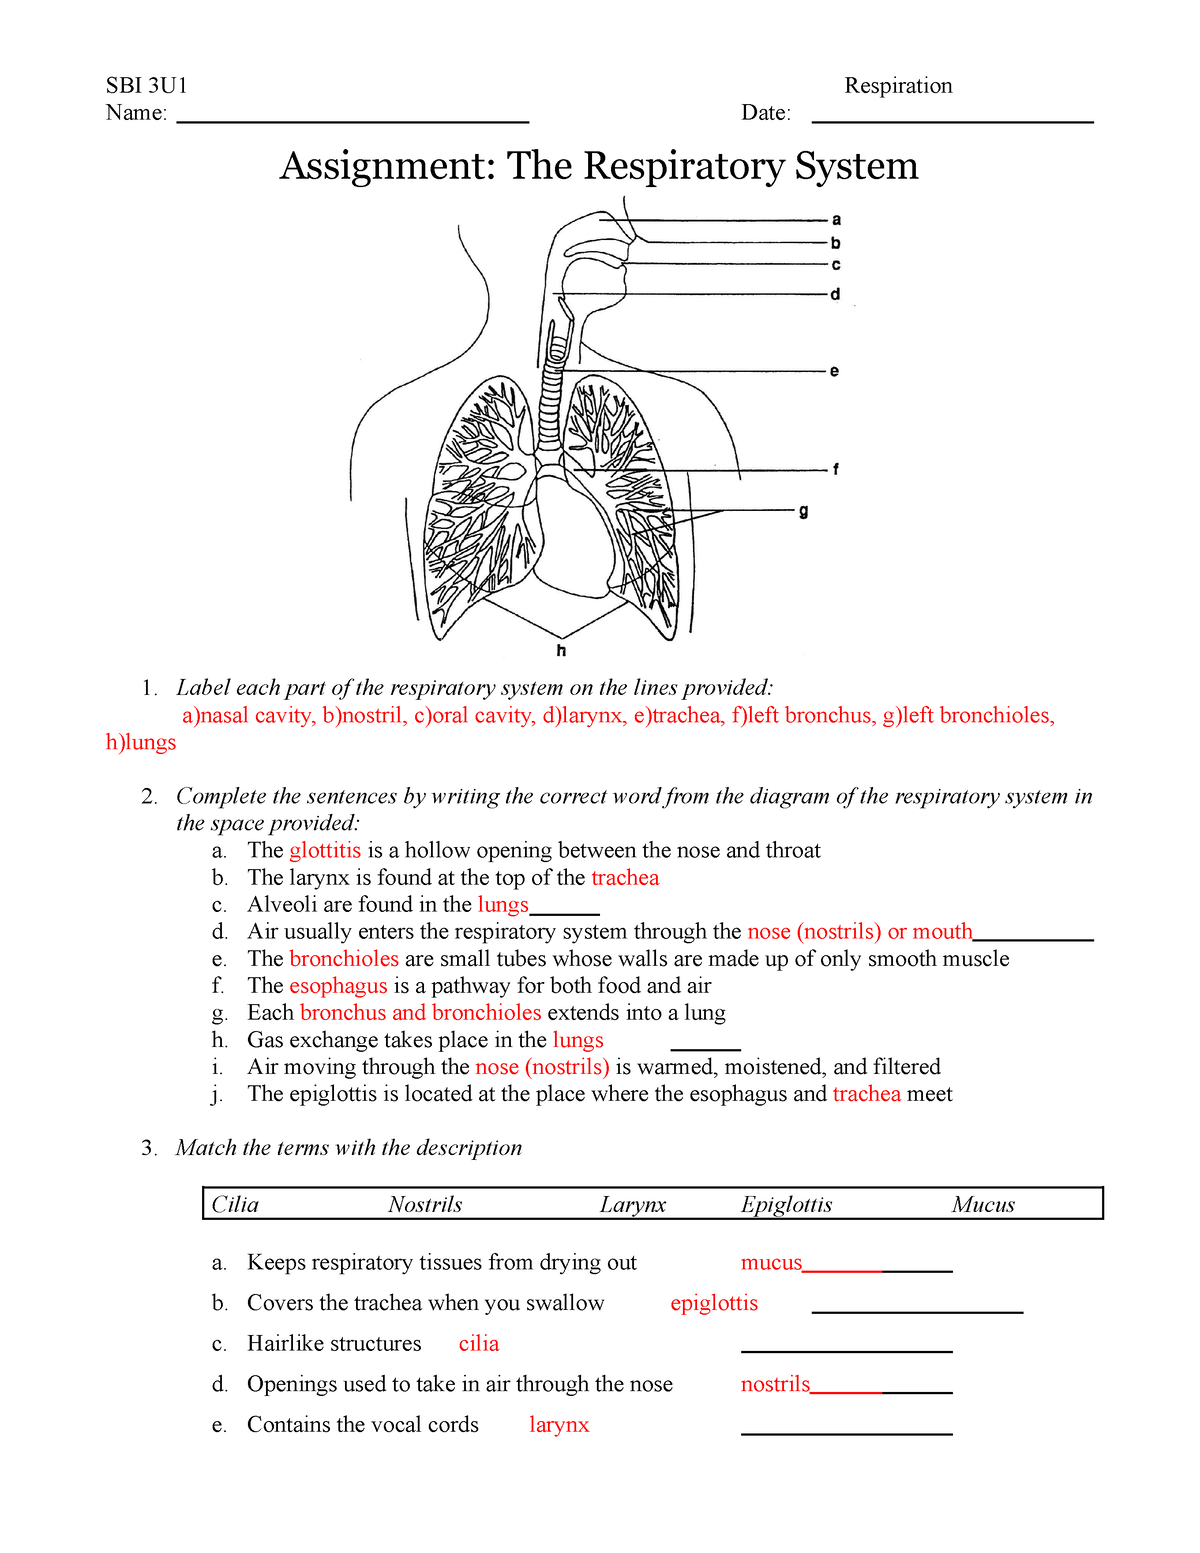 assignment respiratory system